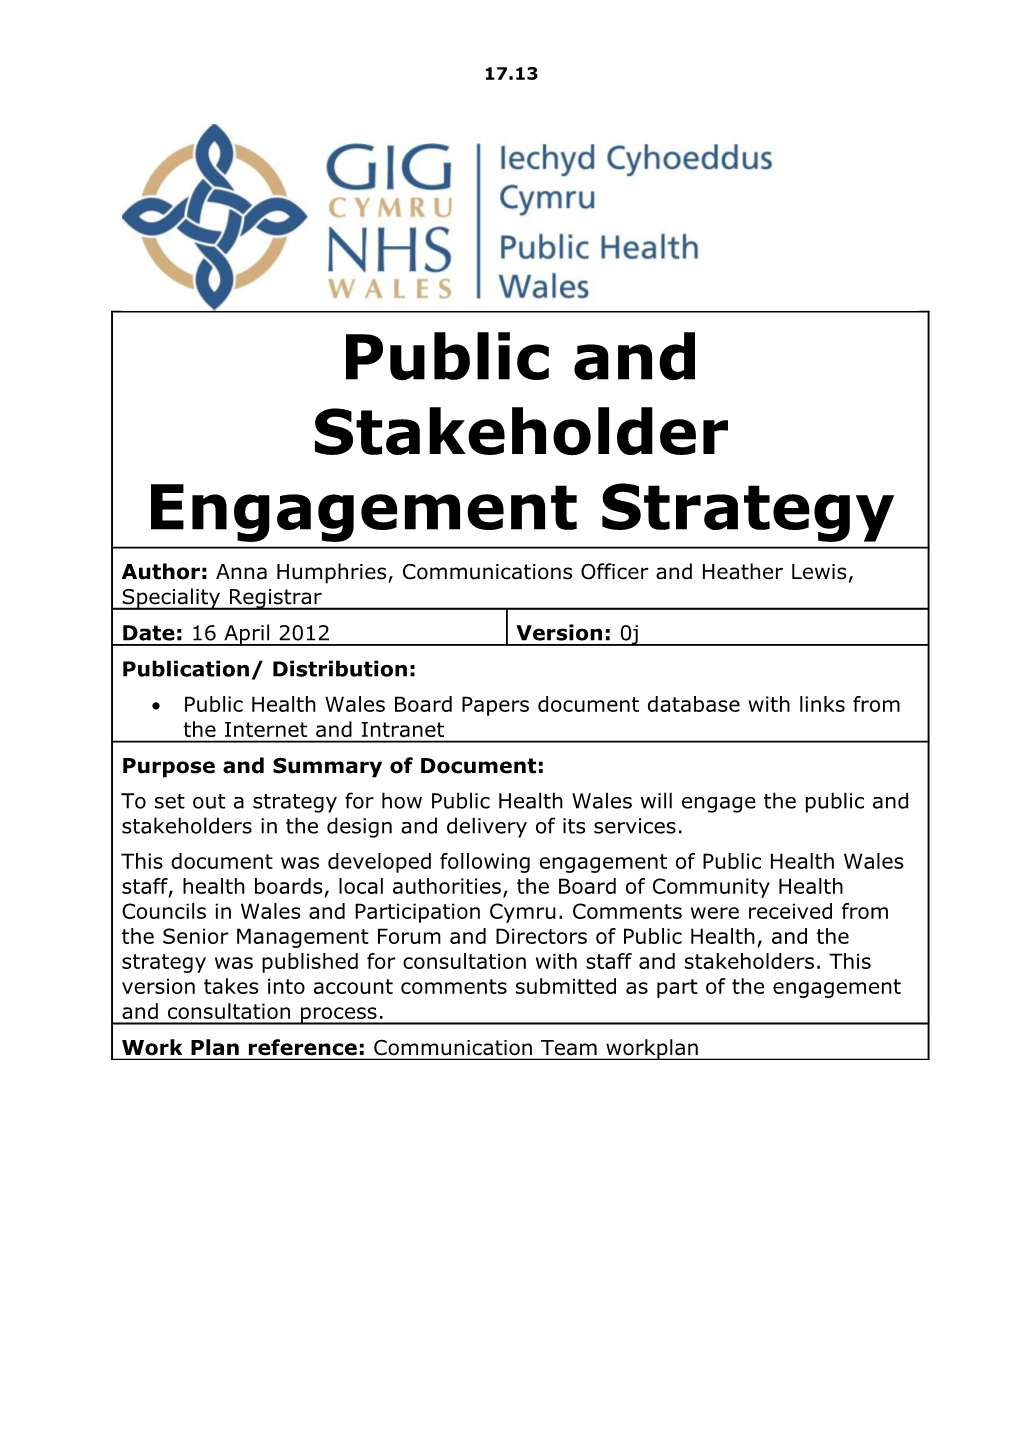 3Why Is Public and Stakeholder Engagement Important?